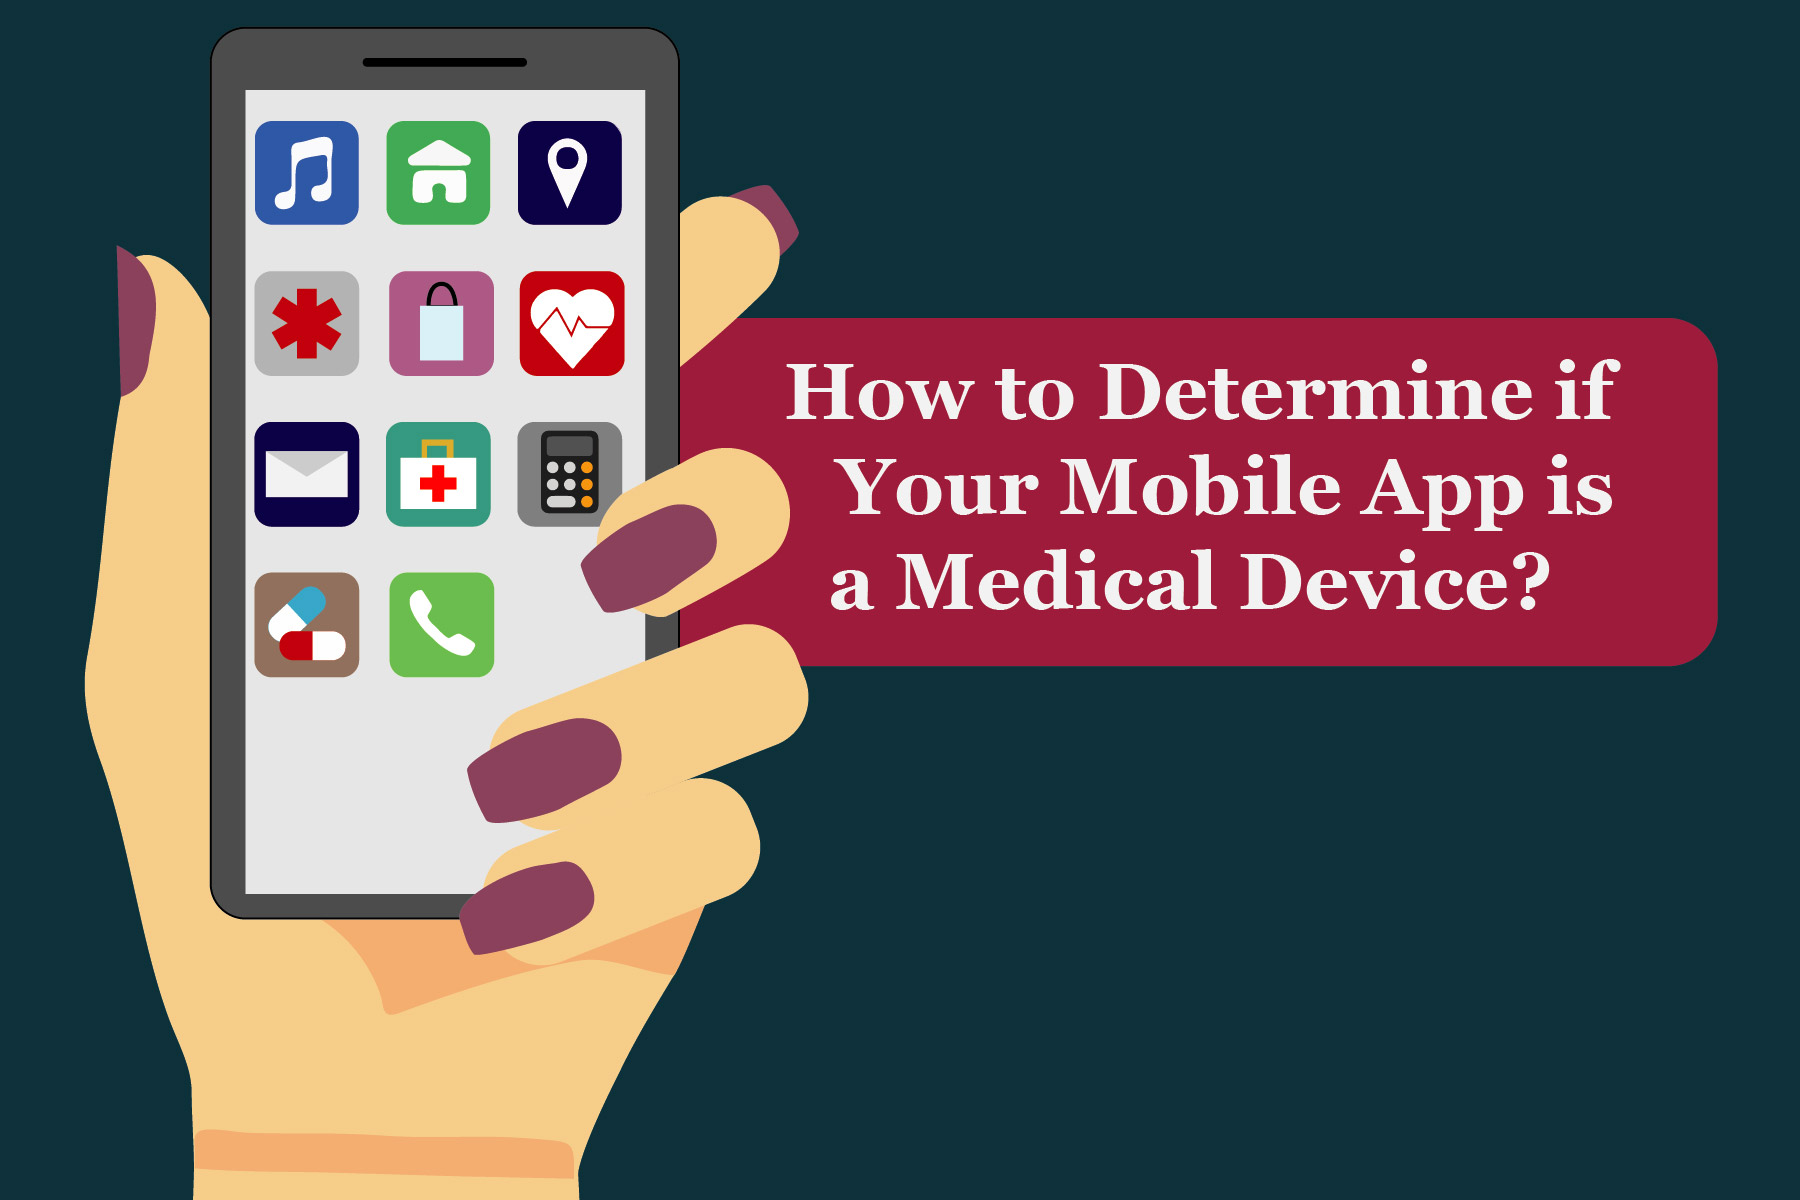 How to Determine if Your Mobile App is a Medical Device?